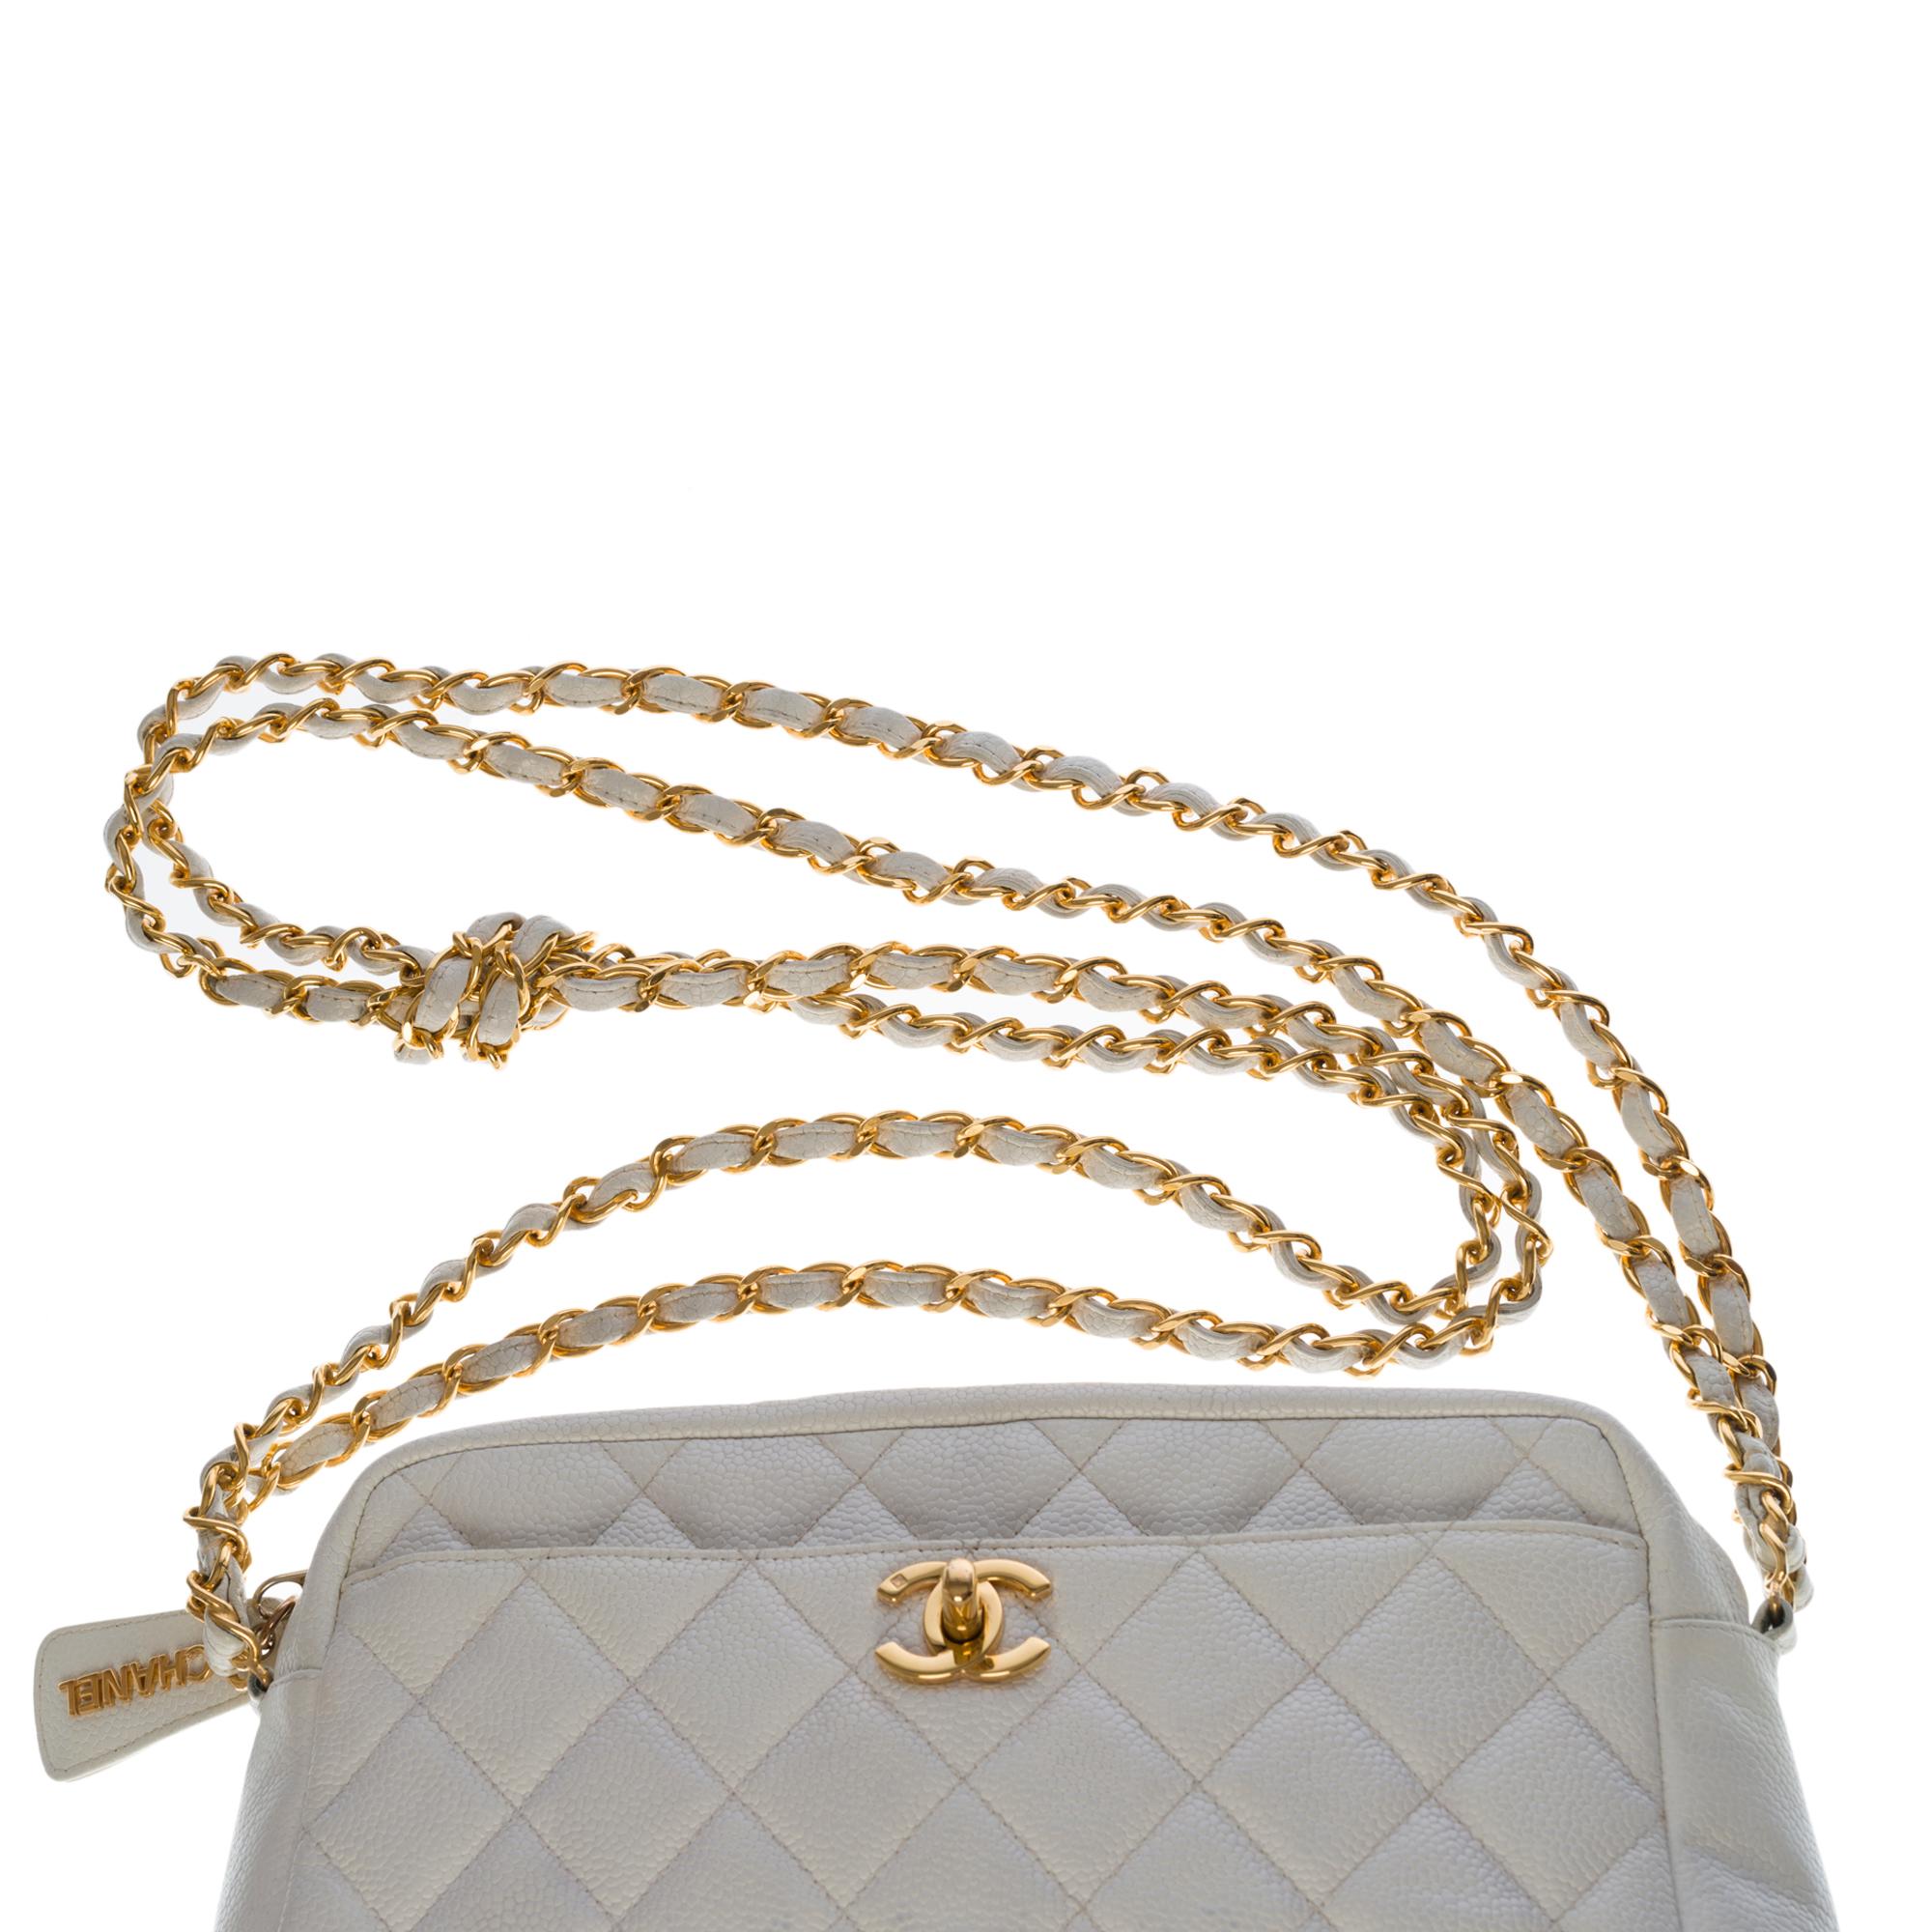 Stunning Chanel Classic shoulder bag in white caviar quilted leather, GHW 3